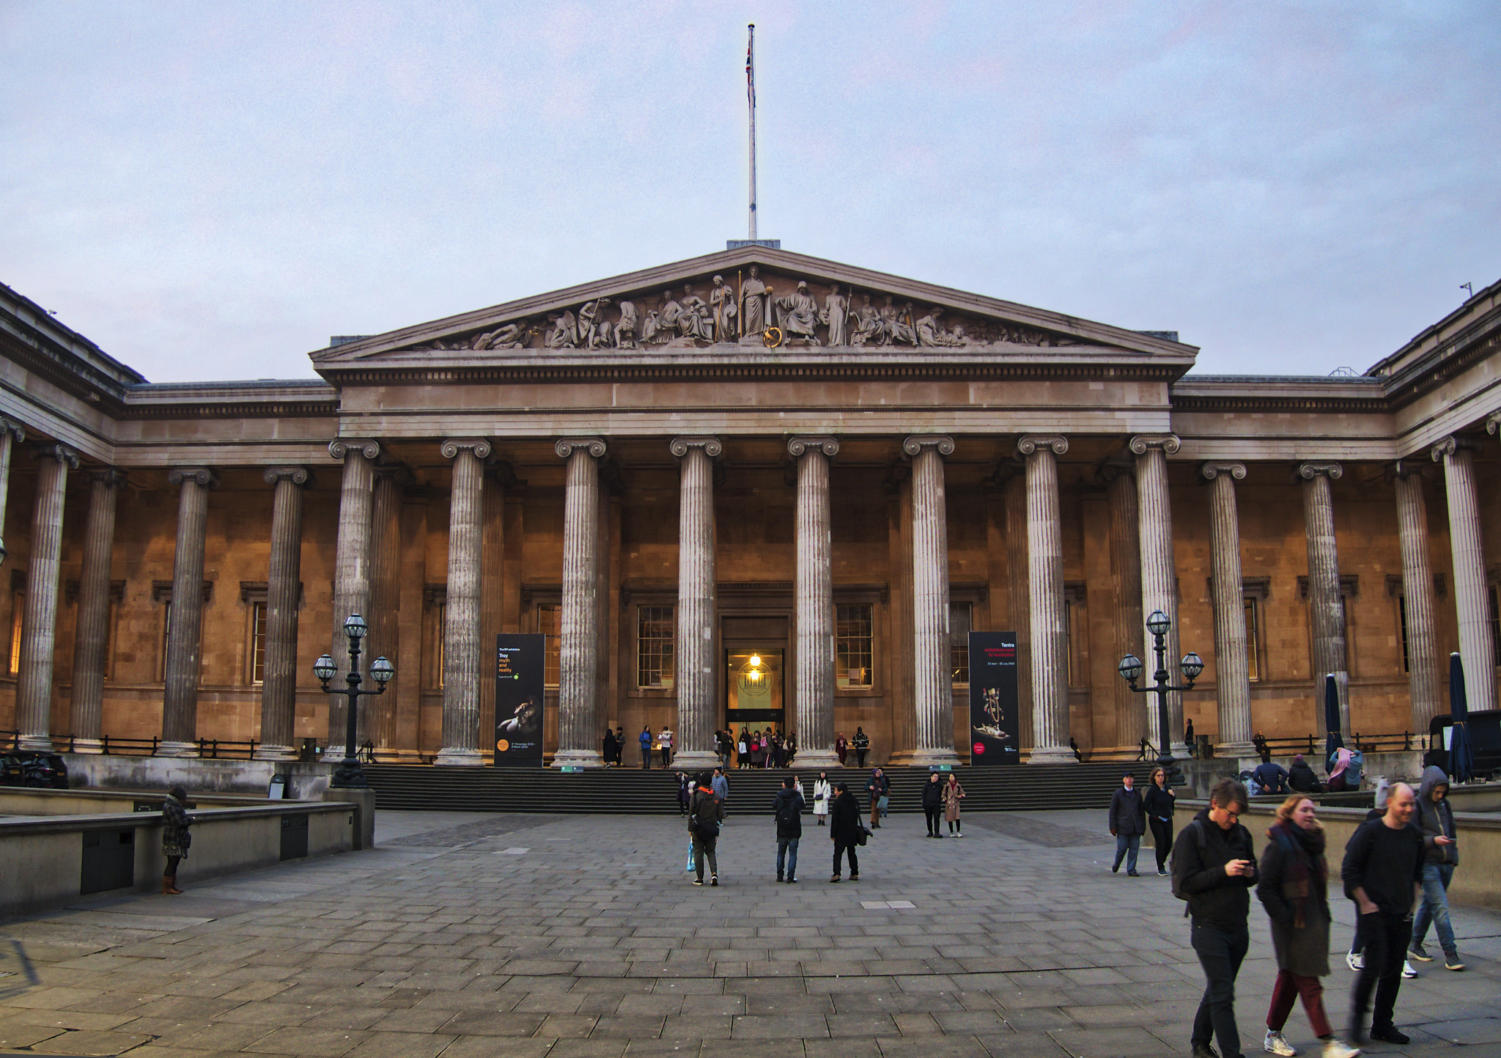 Museums are visited by thousands of people every year. This British Museum is one of many museums one can find.